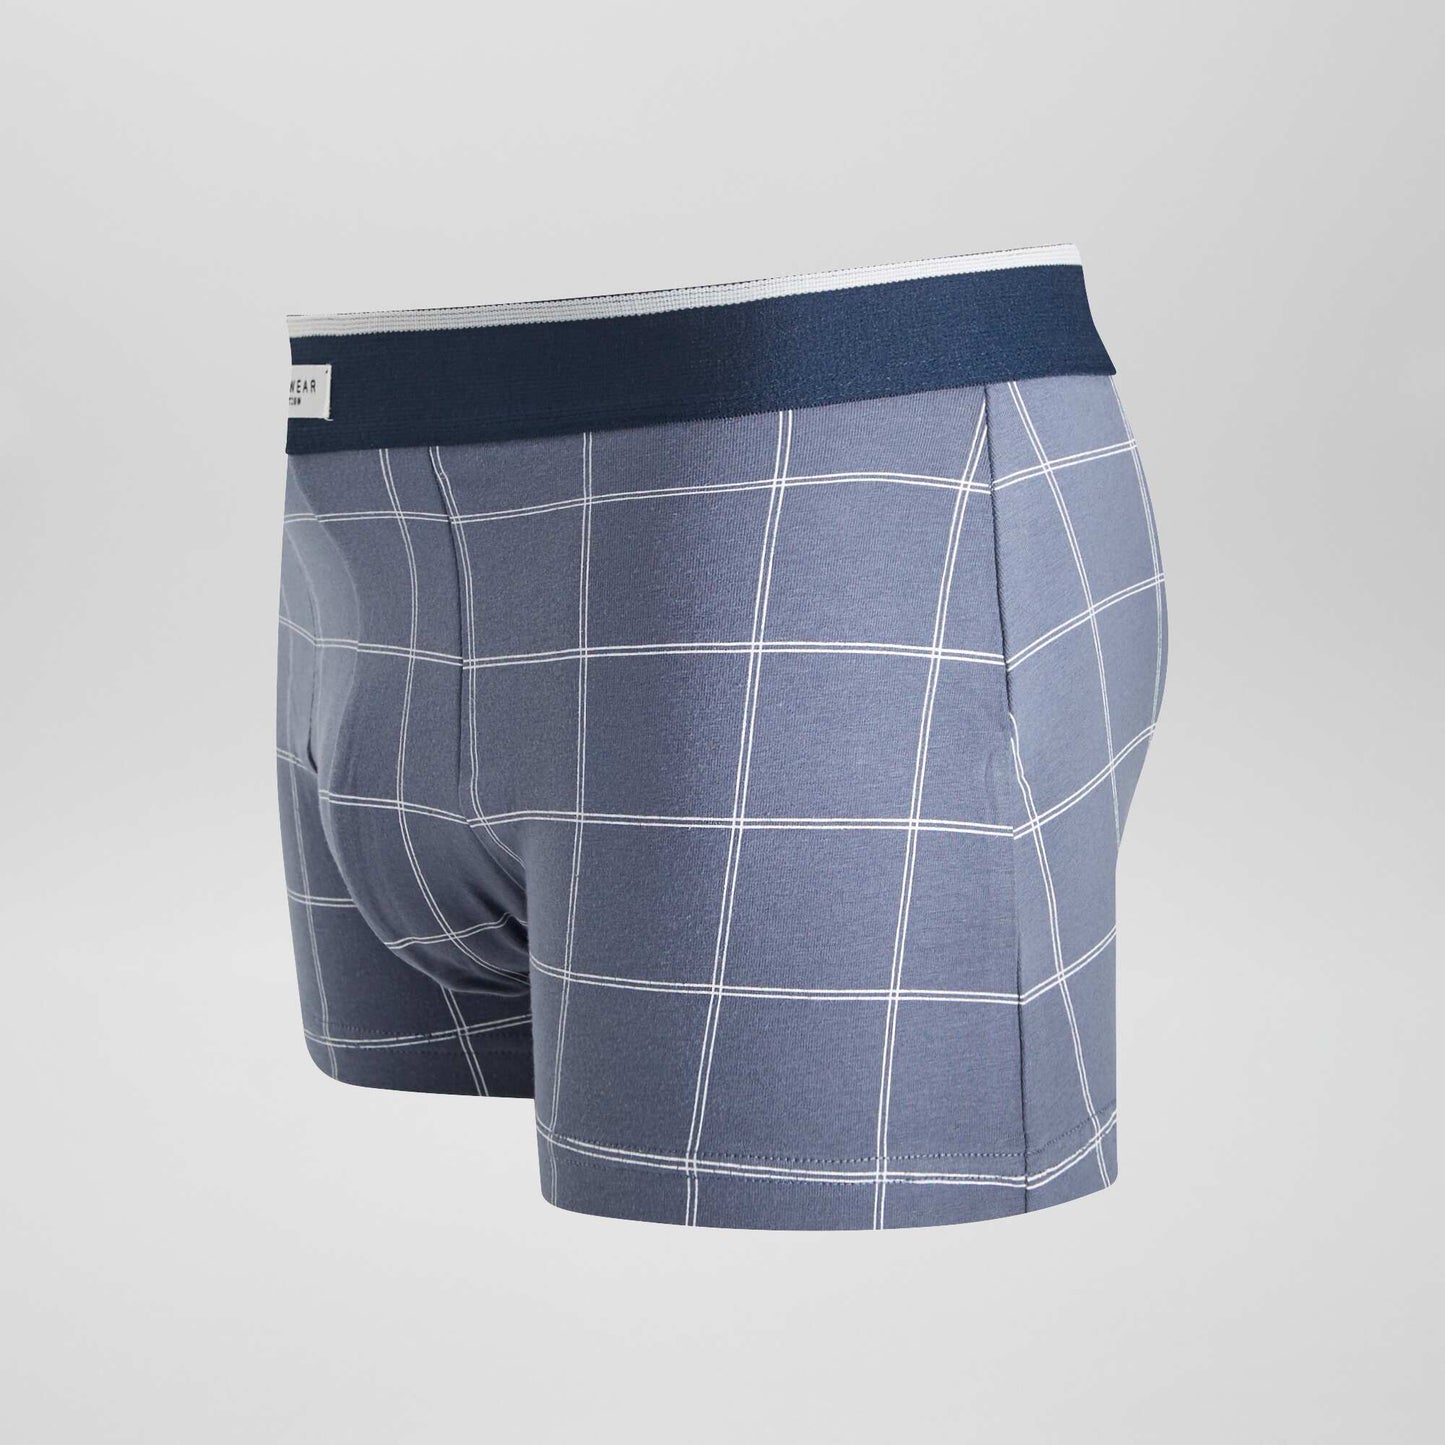 Pack of 3 pairs of stretch boxer shorts BLUE